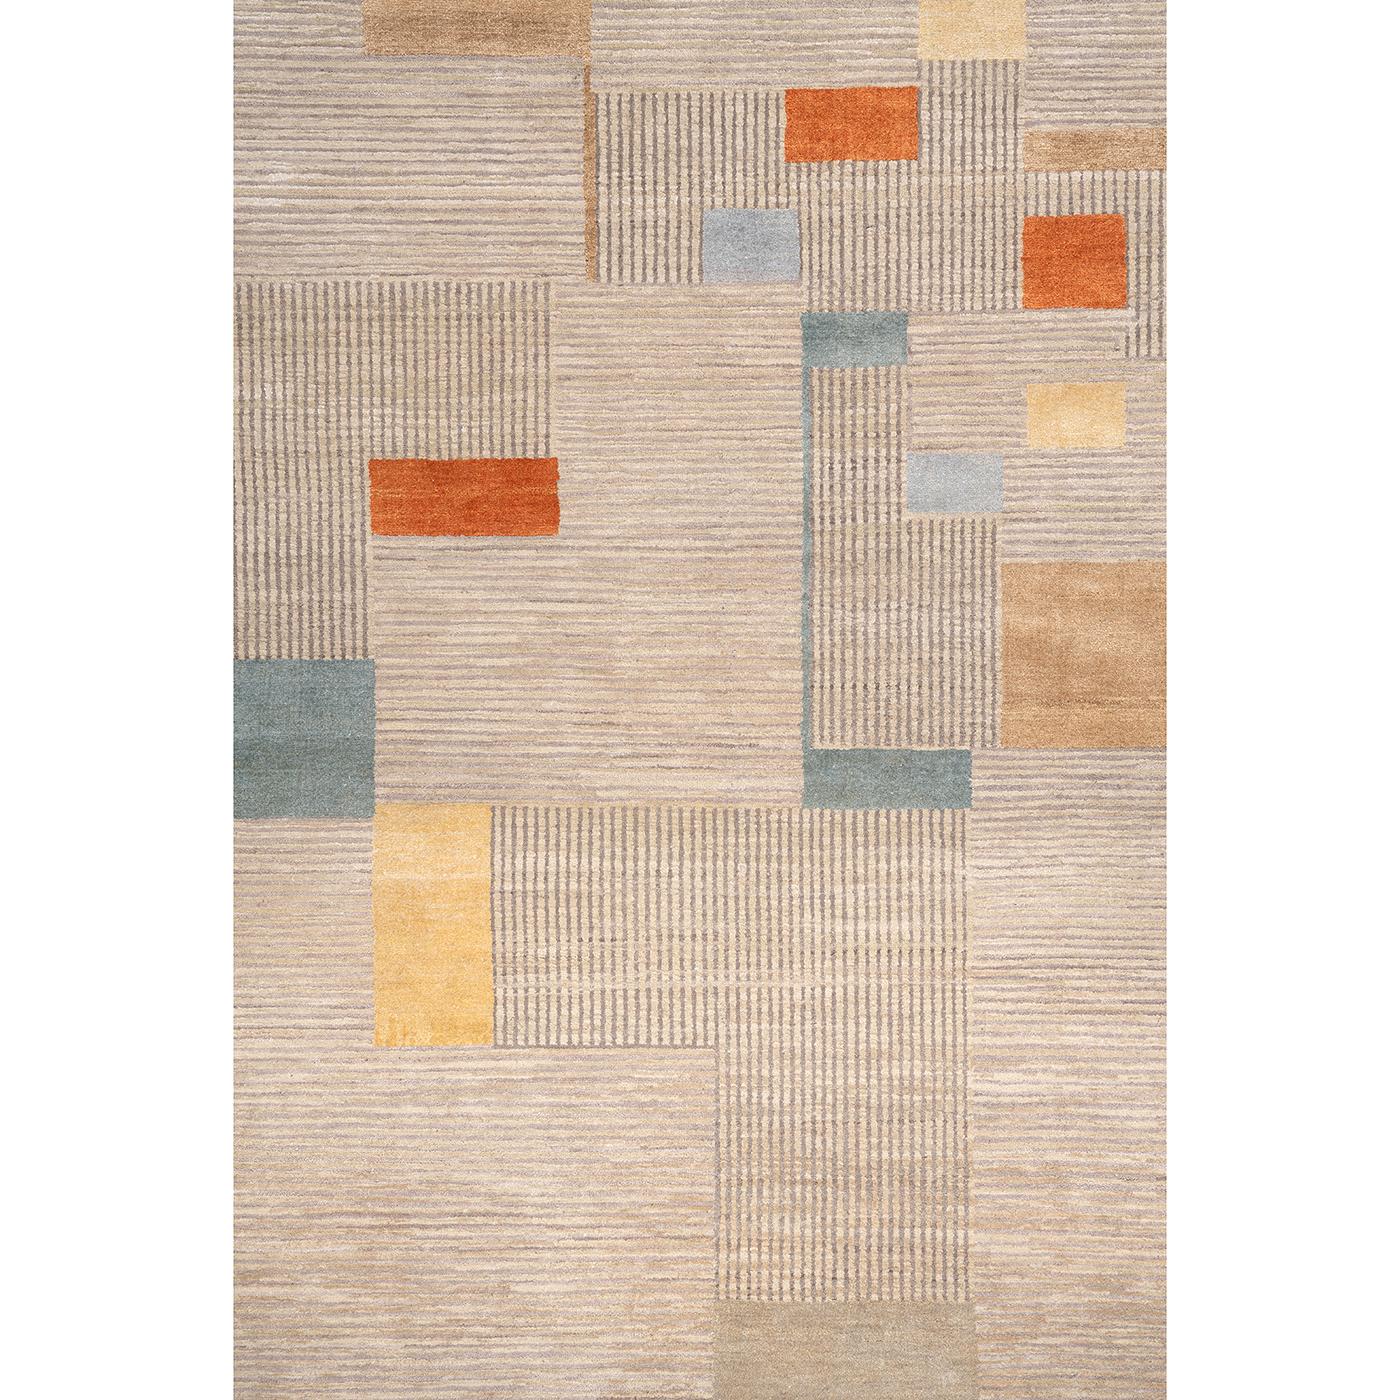 This exquisite rug is handwoven of New Zealand wool and pure Chinese silk using the Tibetan knotting technique (100 knots per square inch). The pattern features an eye-catching graphic of horizontal and vertical lines and sequence of squares and